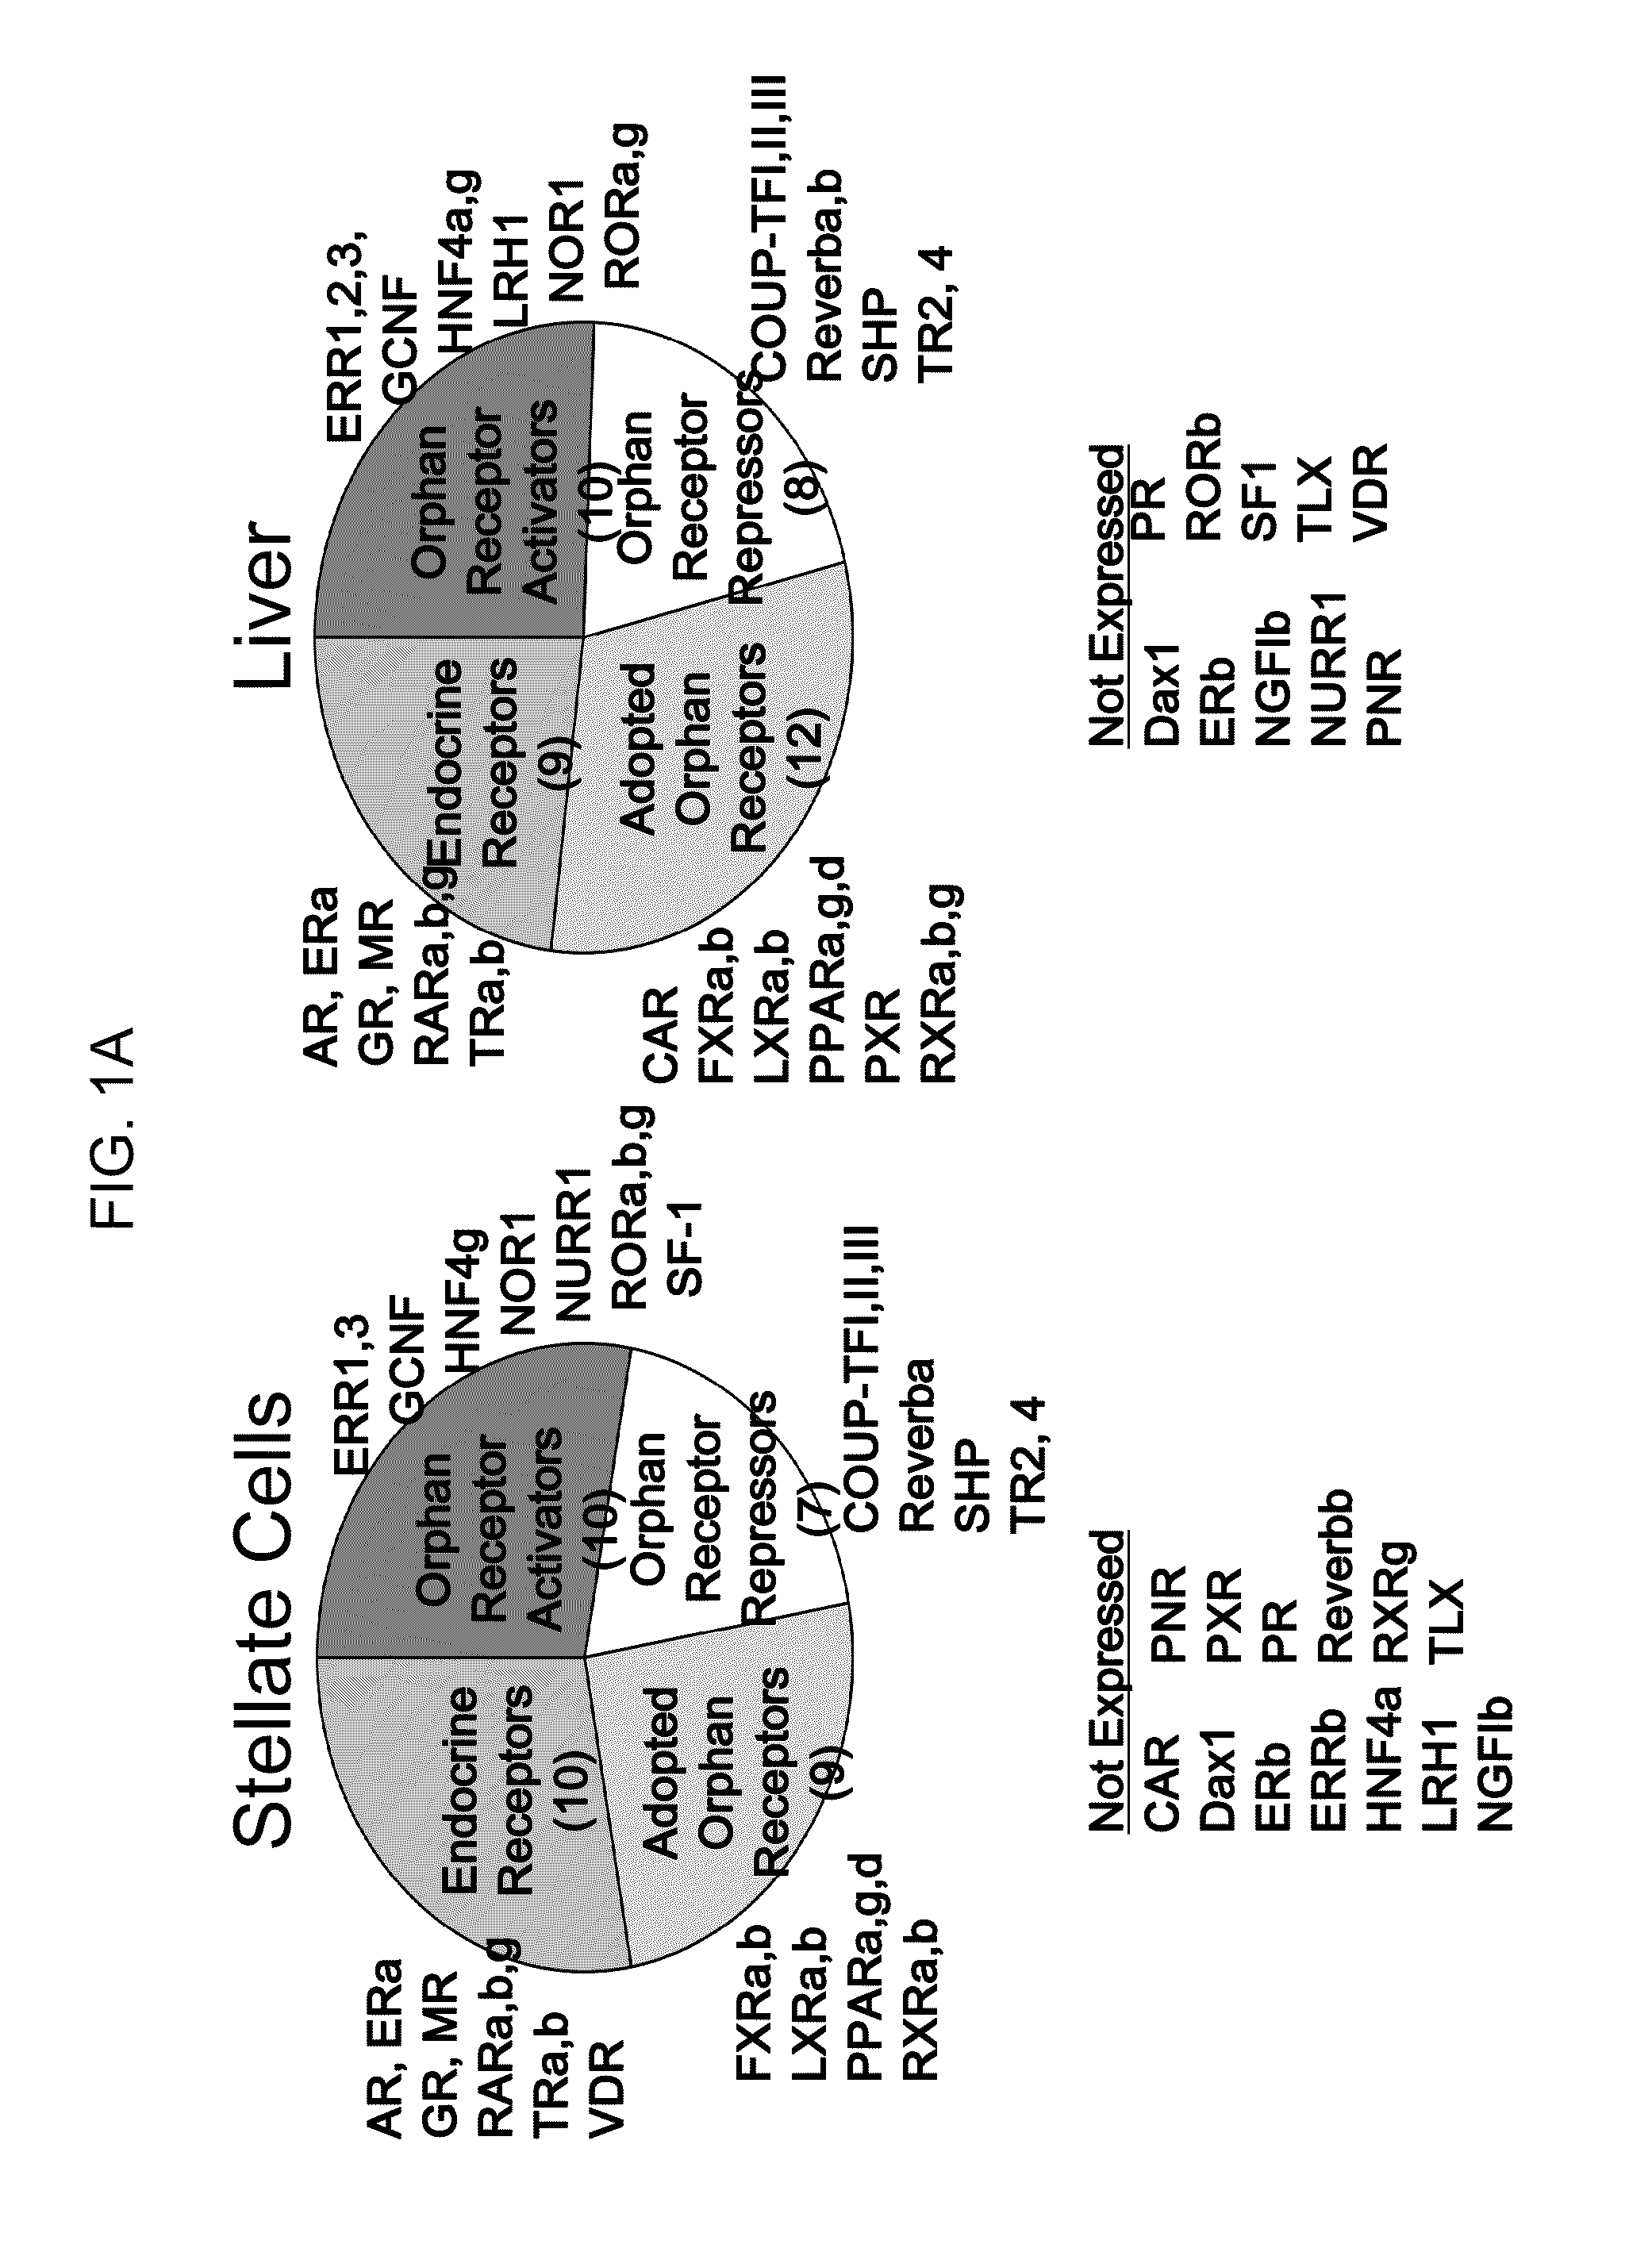 Use of vitamin d receptor agonists and precursors to treat fibrosis